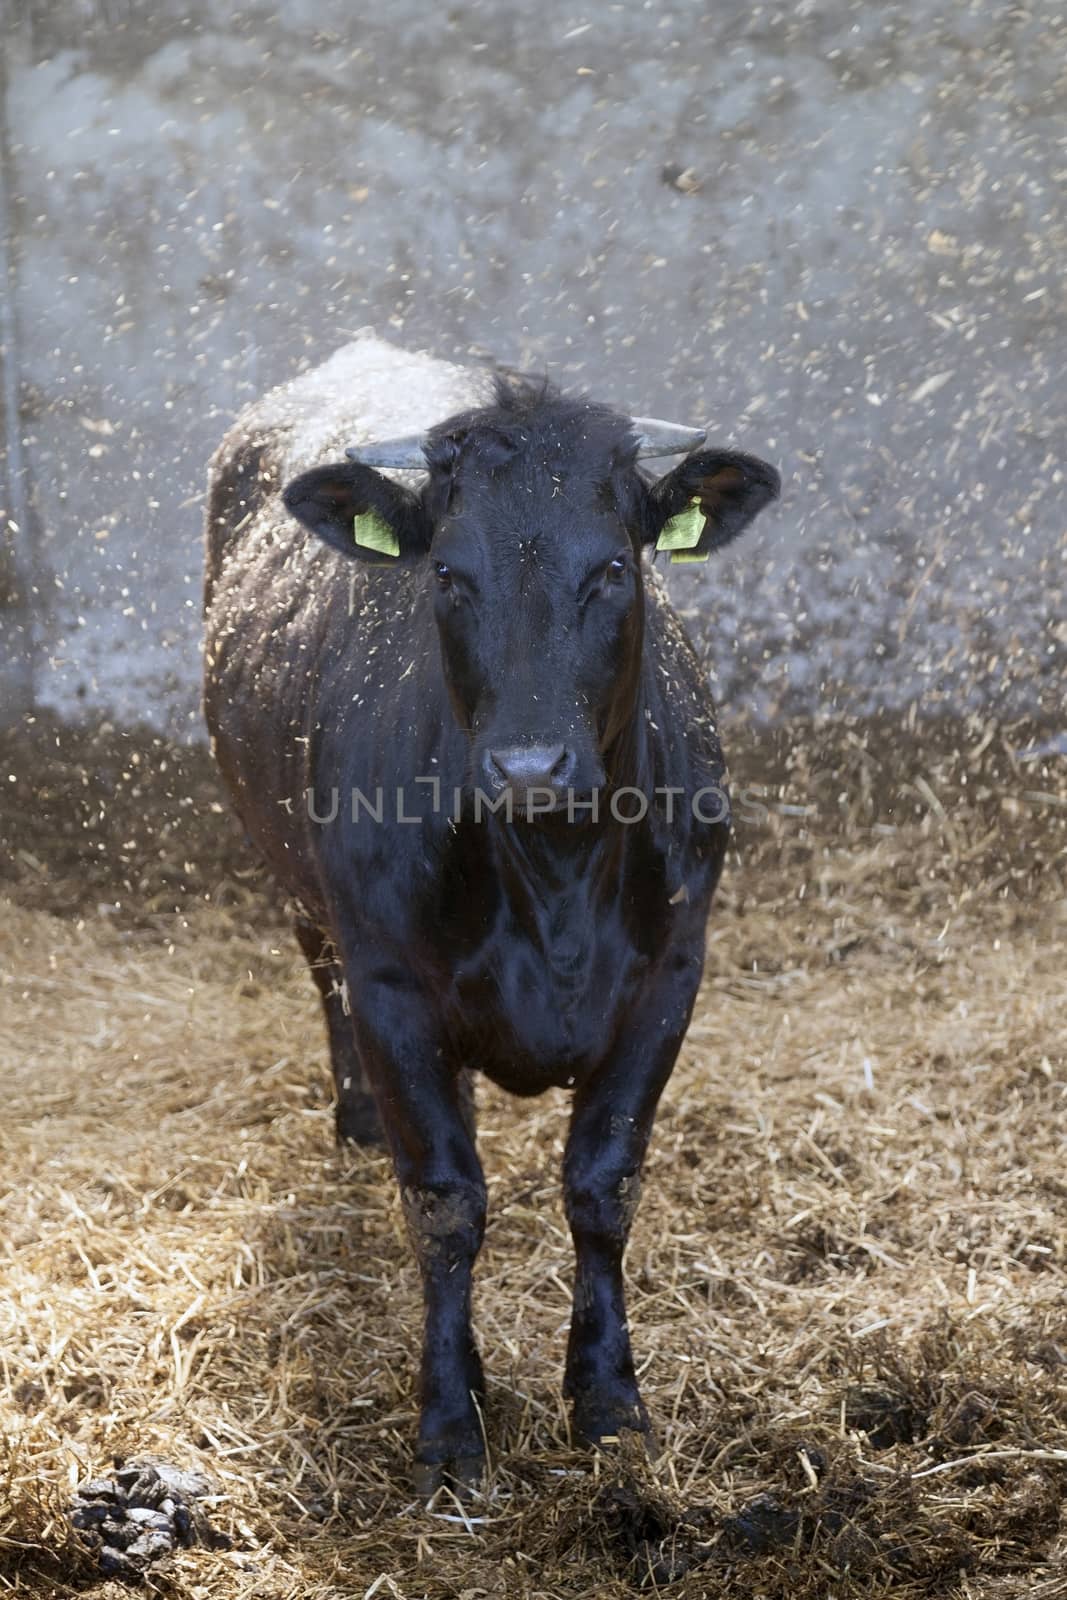 young black cow in stable with fresh straw falling